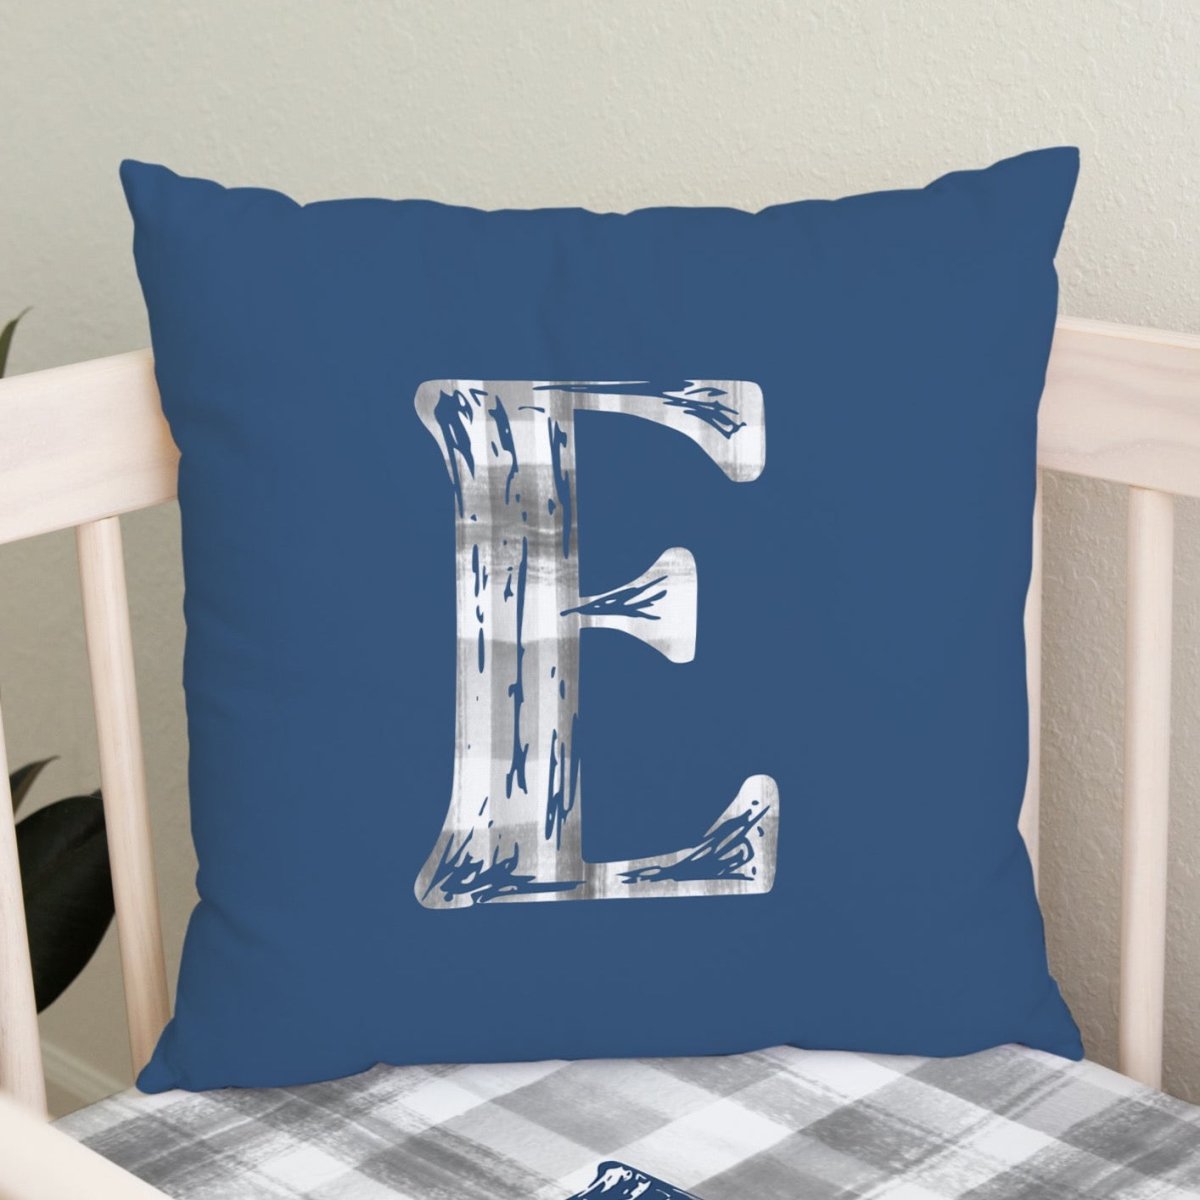 Vintage Truck Personalized Throw Pillow - gender_boy, text, Vintage Truck